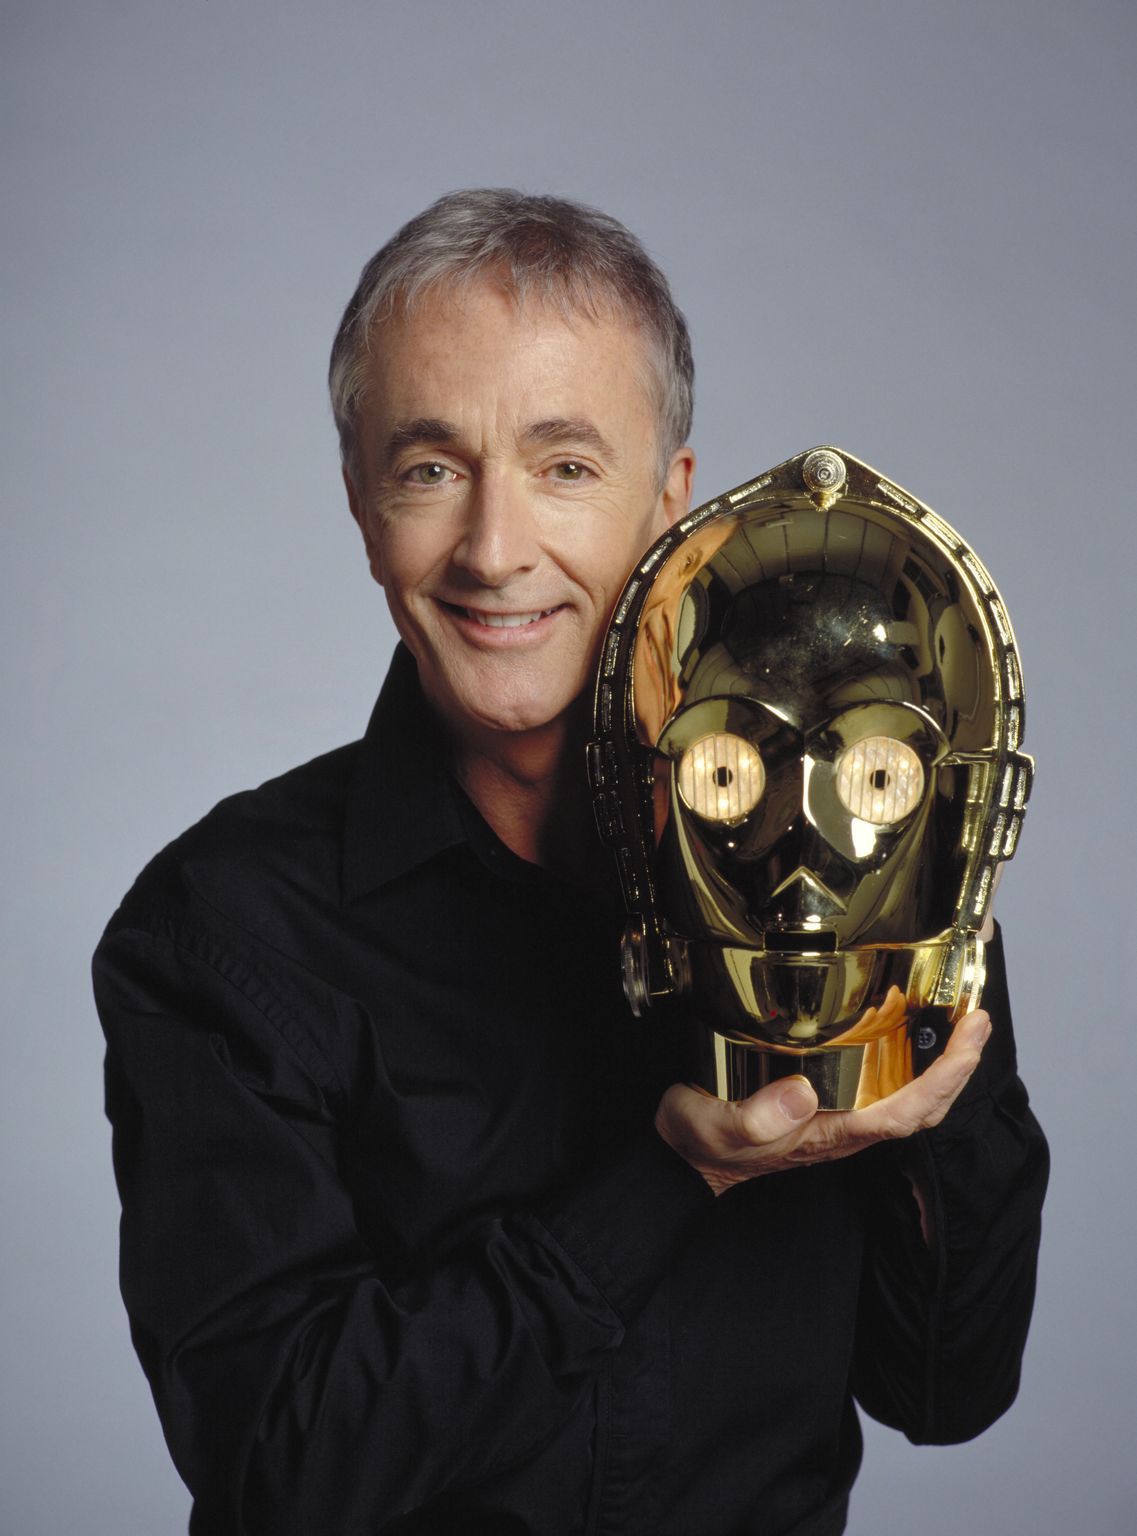 Who provided the voice for C-3PO in the Star Wars films?